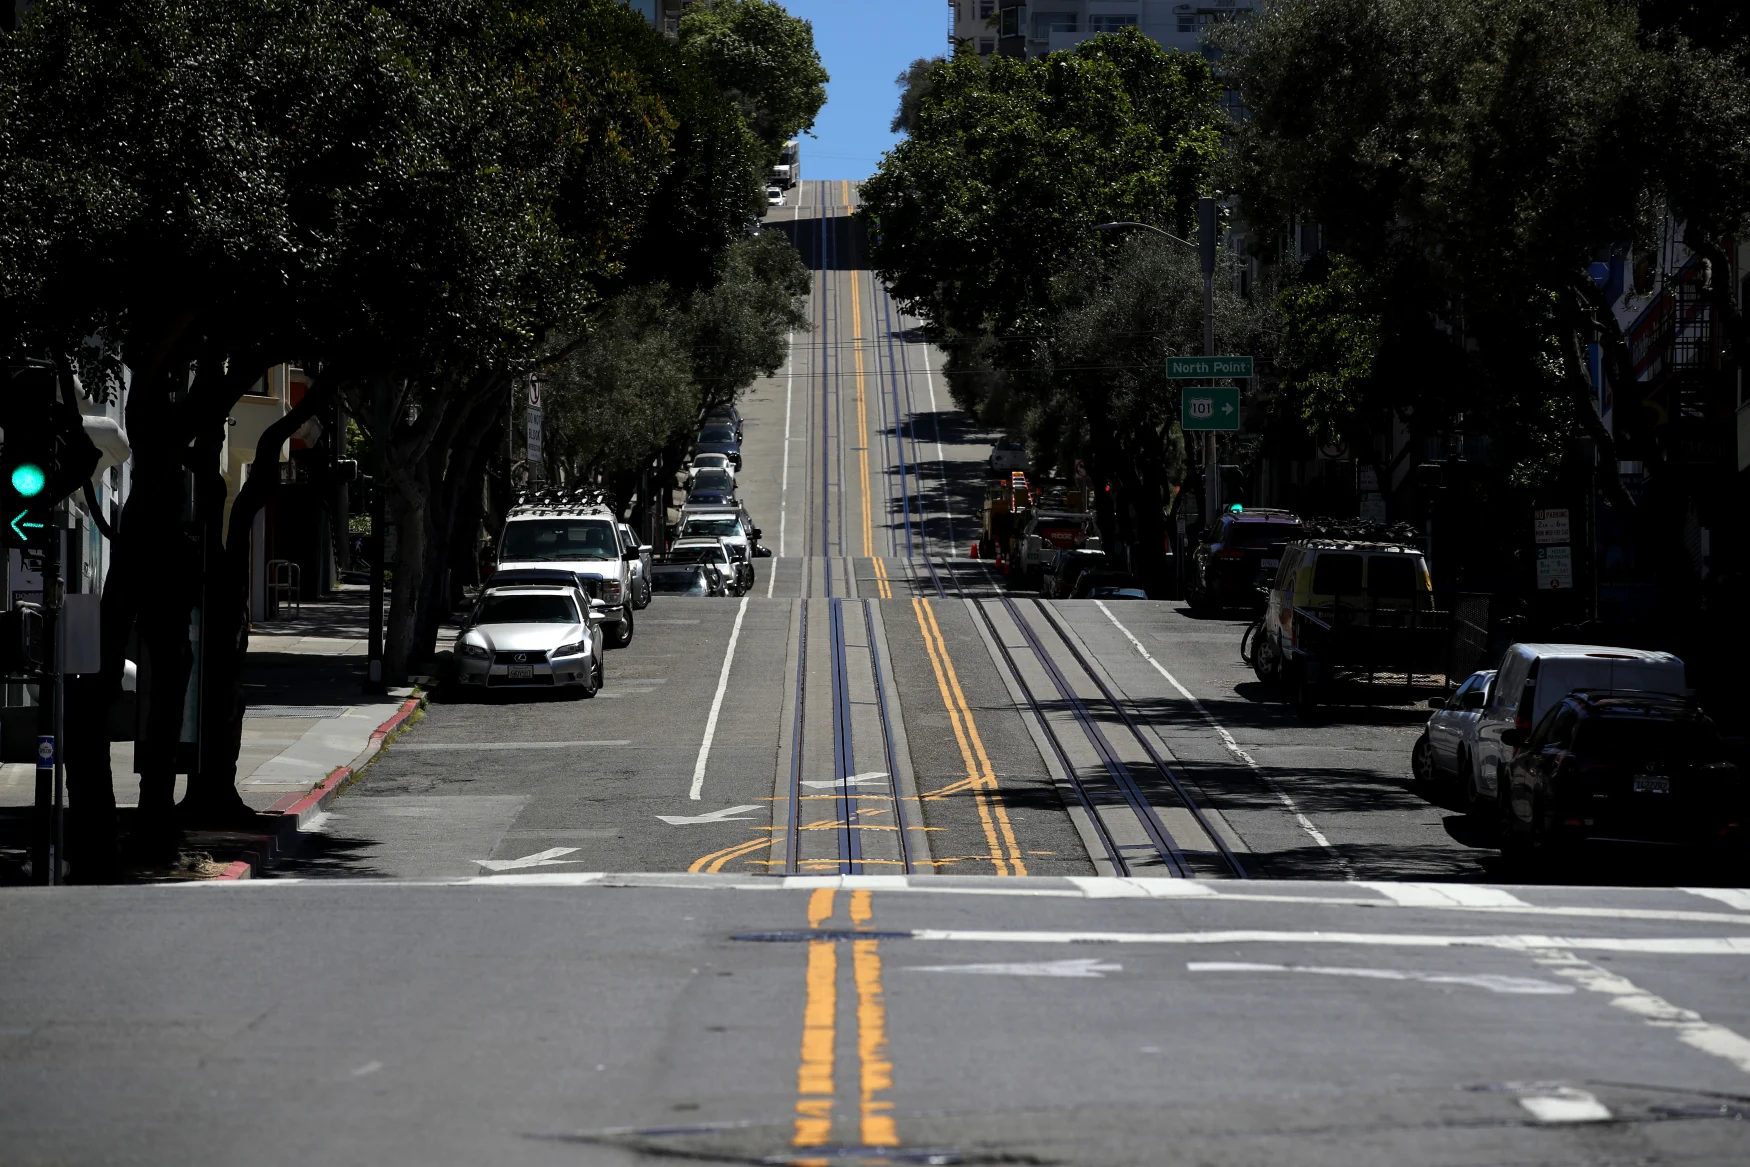 SAN FRANCISCO, CALIFORNIA  - APRIL 27: Hyde Street sits empty on April 27, 2020 in San Francisco, California. Officials from several counties in the San Francisco Bay Area have extended the coronavirus (COVID-19) shelter in place order through May. (Photo by Justin Sullivan/Getty Images)